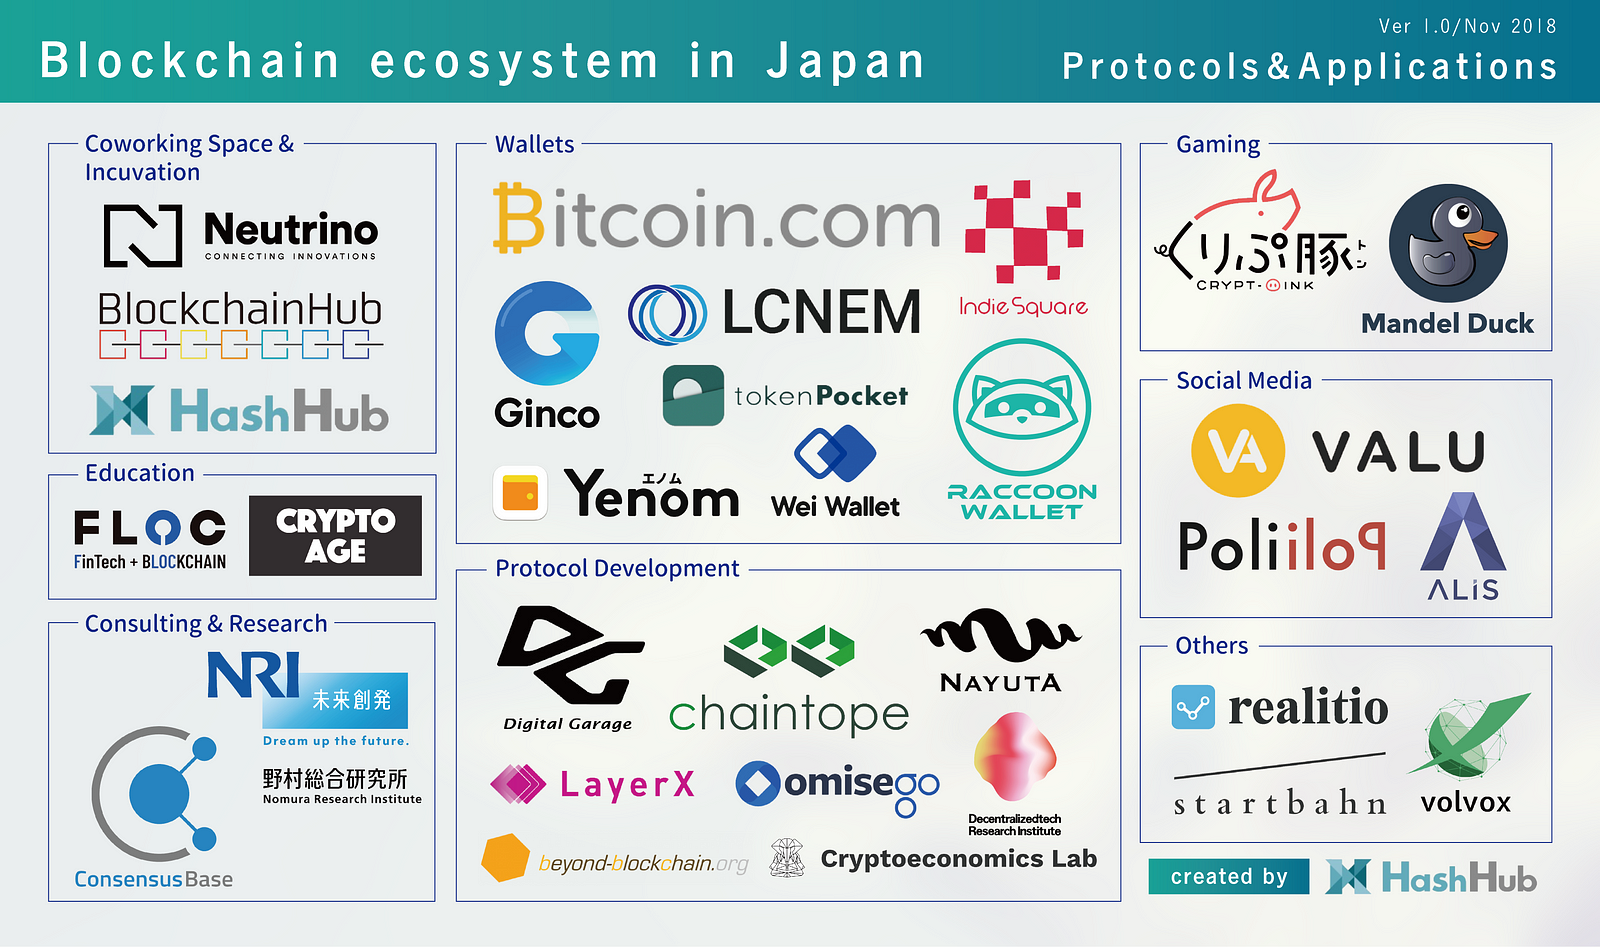 Cryptocurrency-related Regulators and Companies in Japan